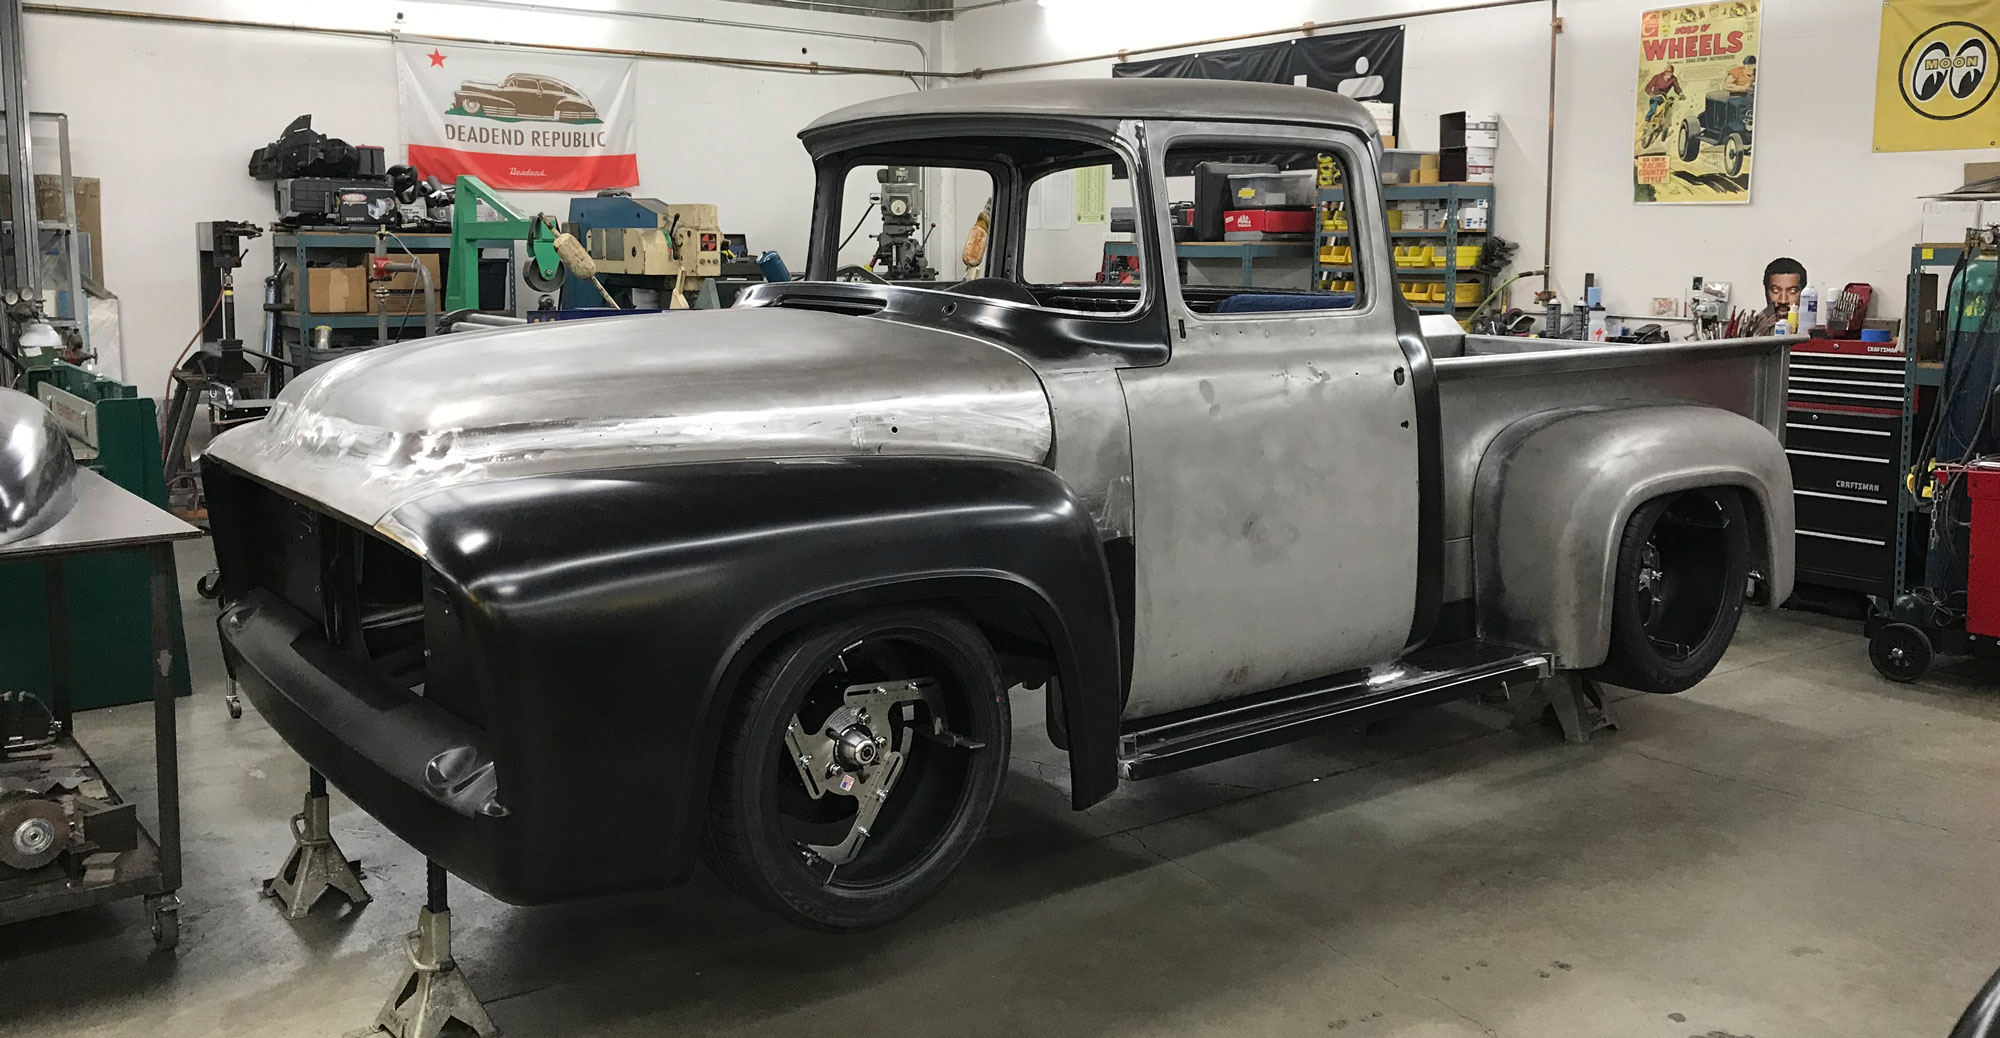 ’56 F-100 completed build